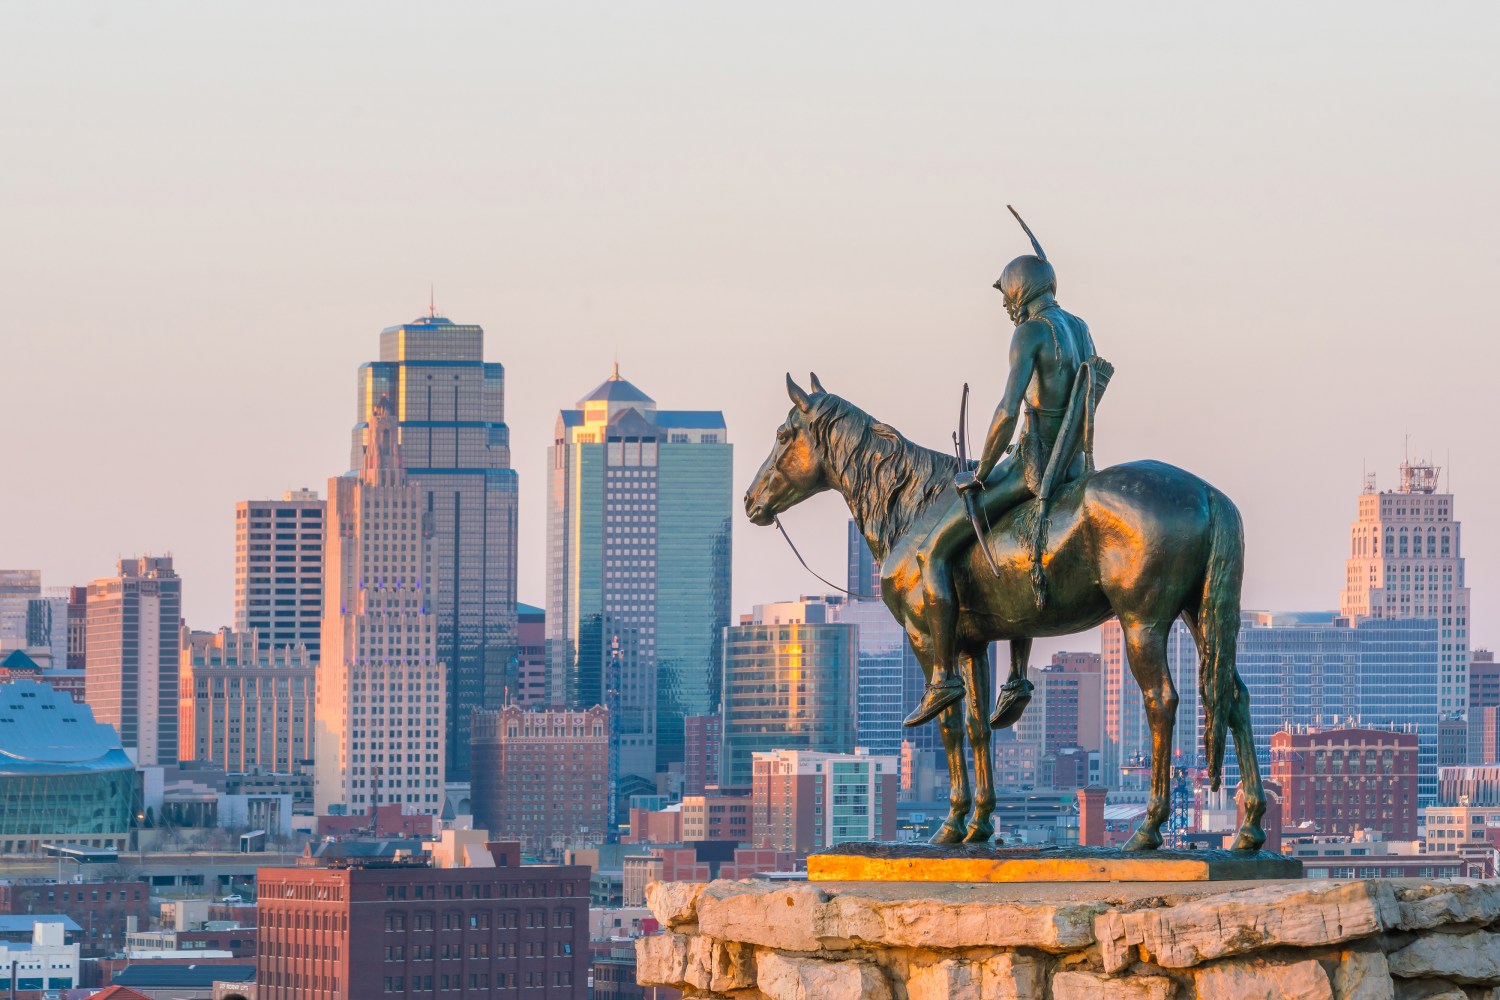 The Scout overlooking(108 years old statue) in downtown Kansas City. Shutterstock